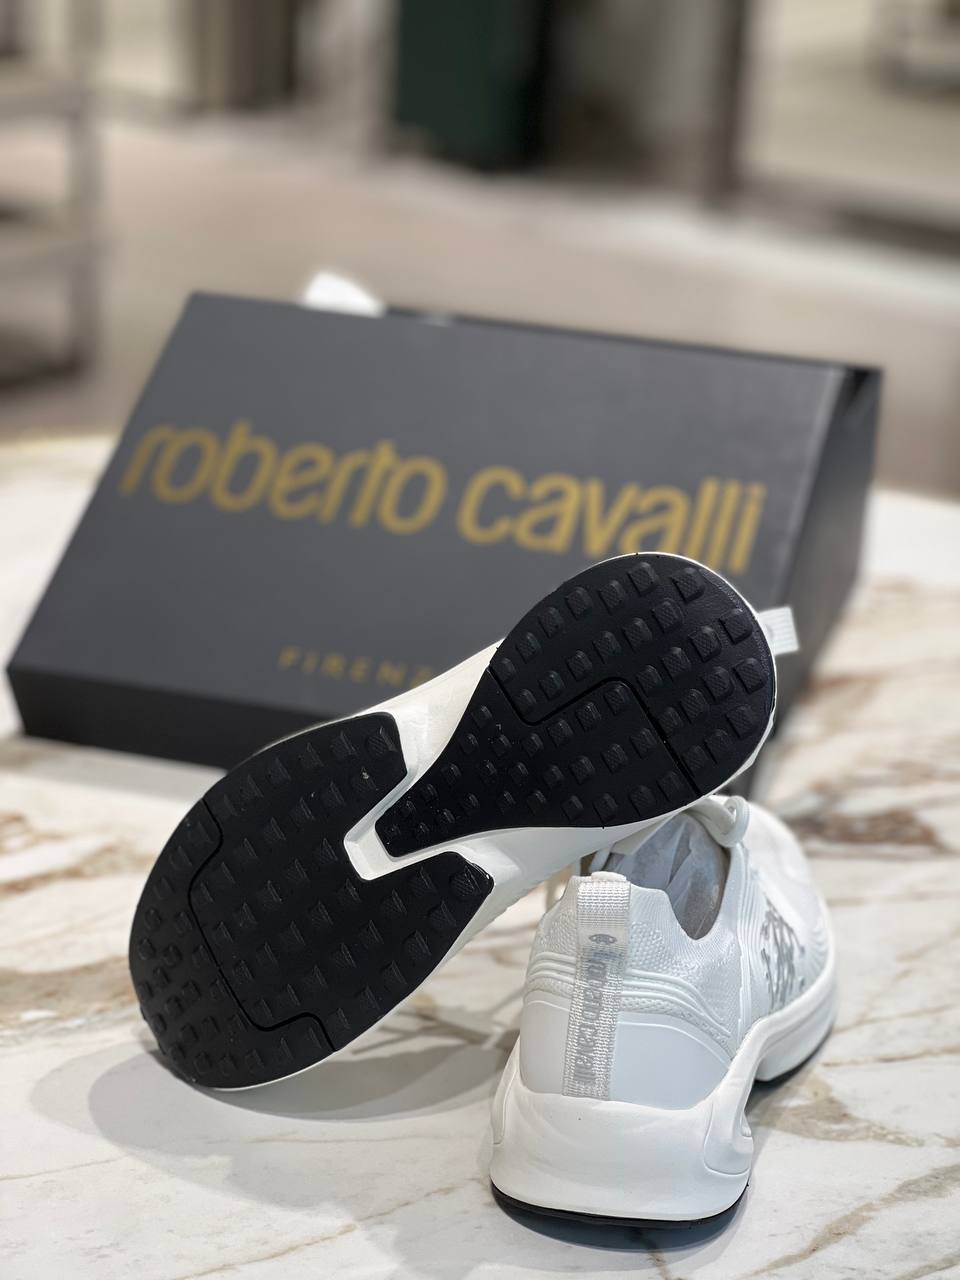 Roberto Cavalli Outlets 5837